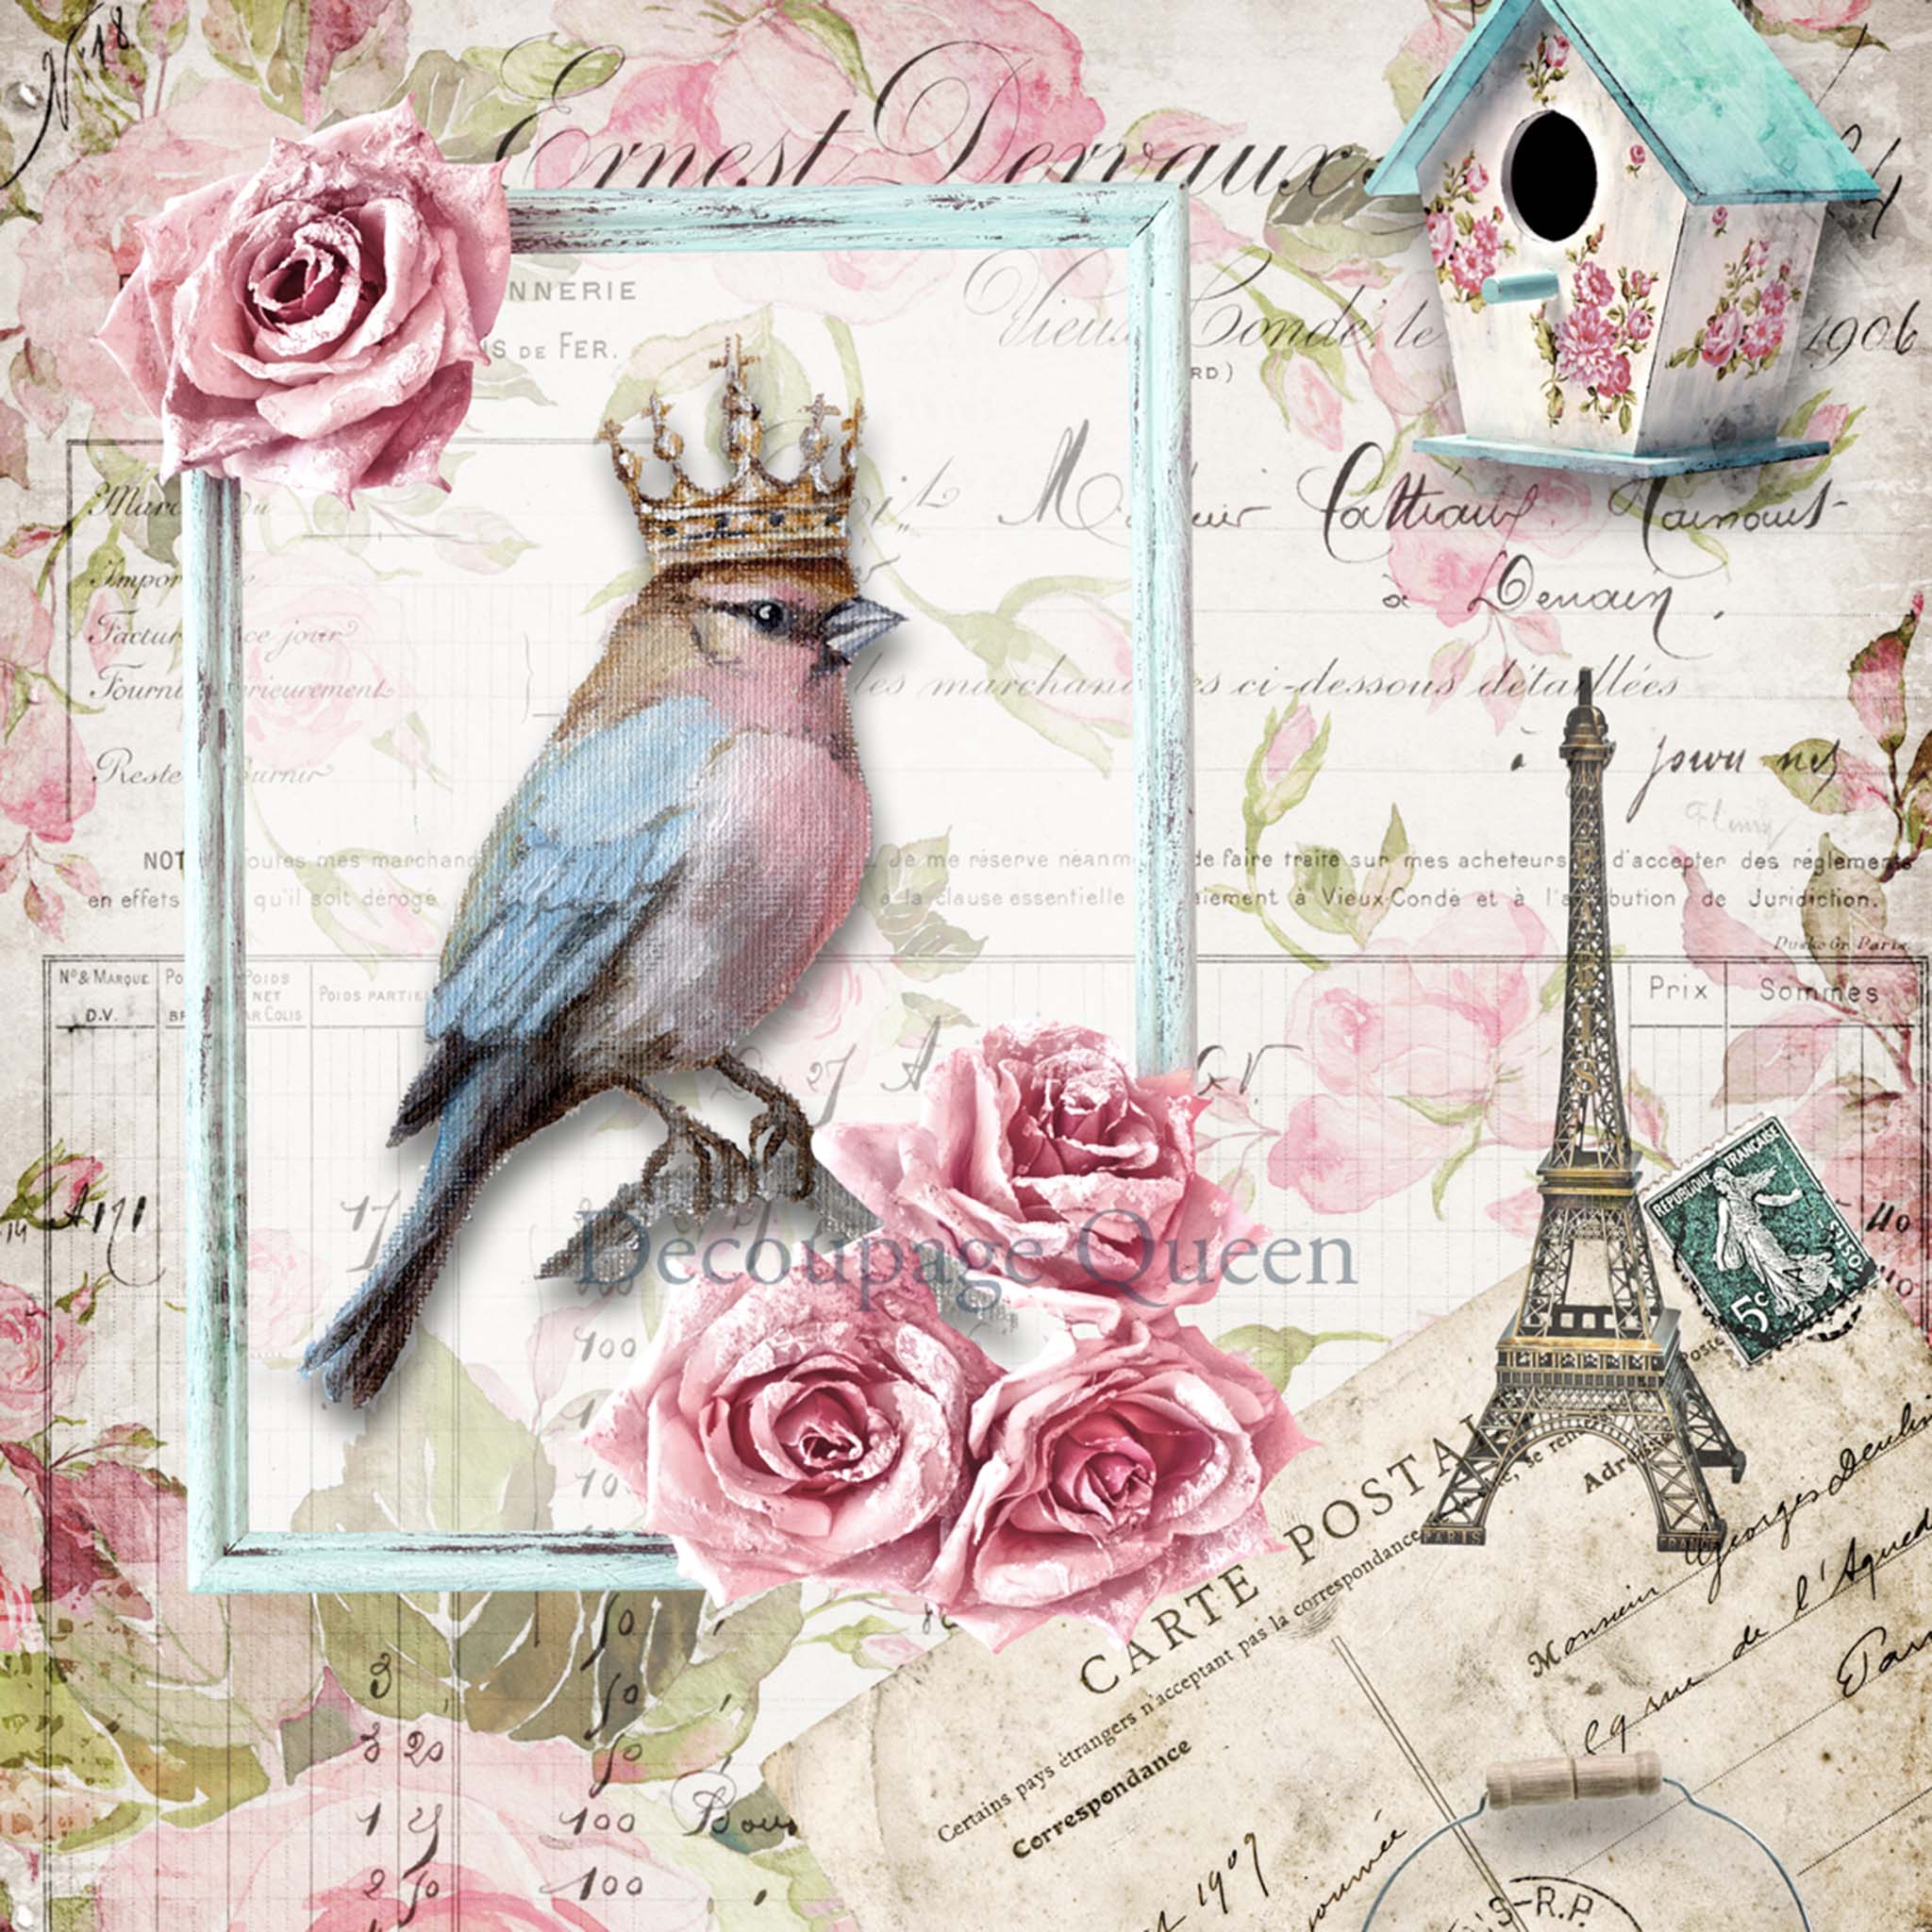 Close-up of an A4 rice paper design that features a small bird wearing a crown perched in a picture frame, surrounded by iconic Parisian elements like the Eiffel Tower, a birdhouse, and a French postcard against a floral background.